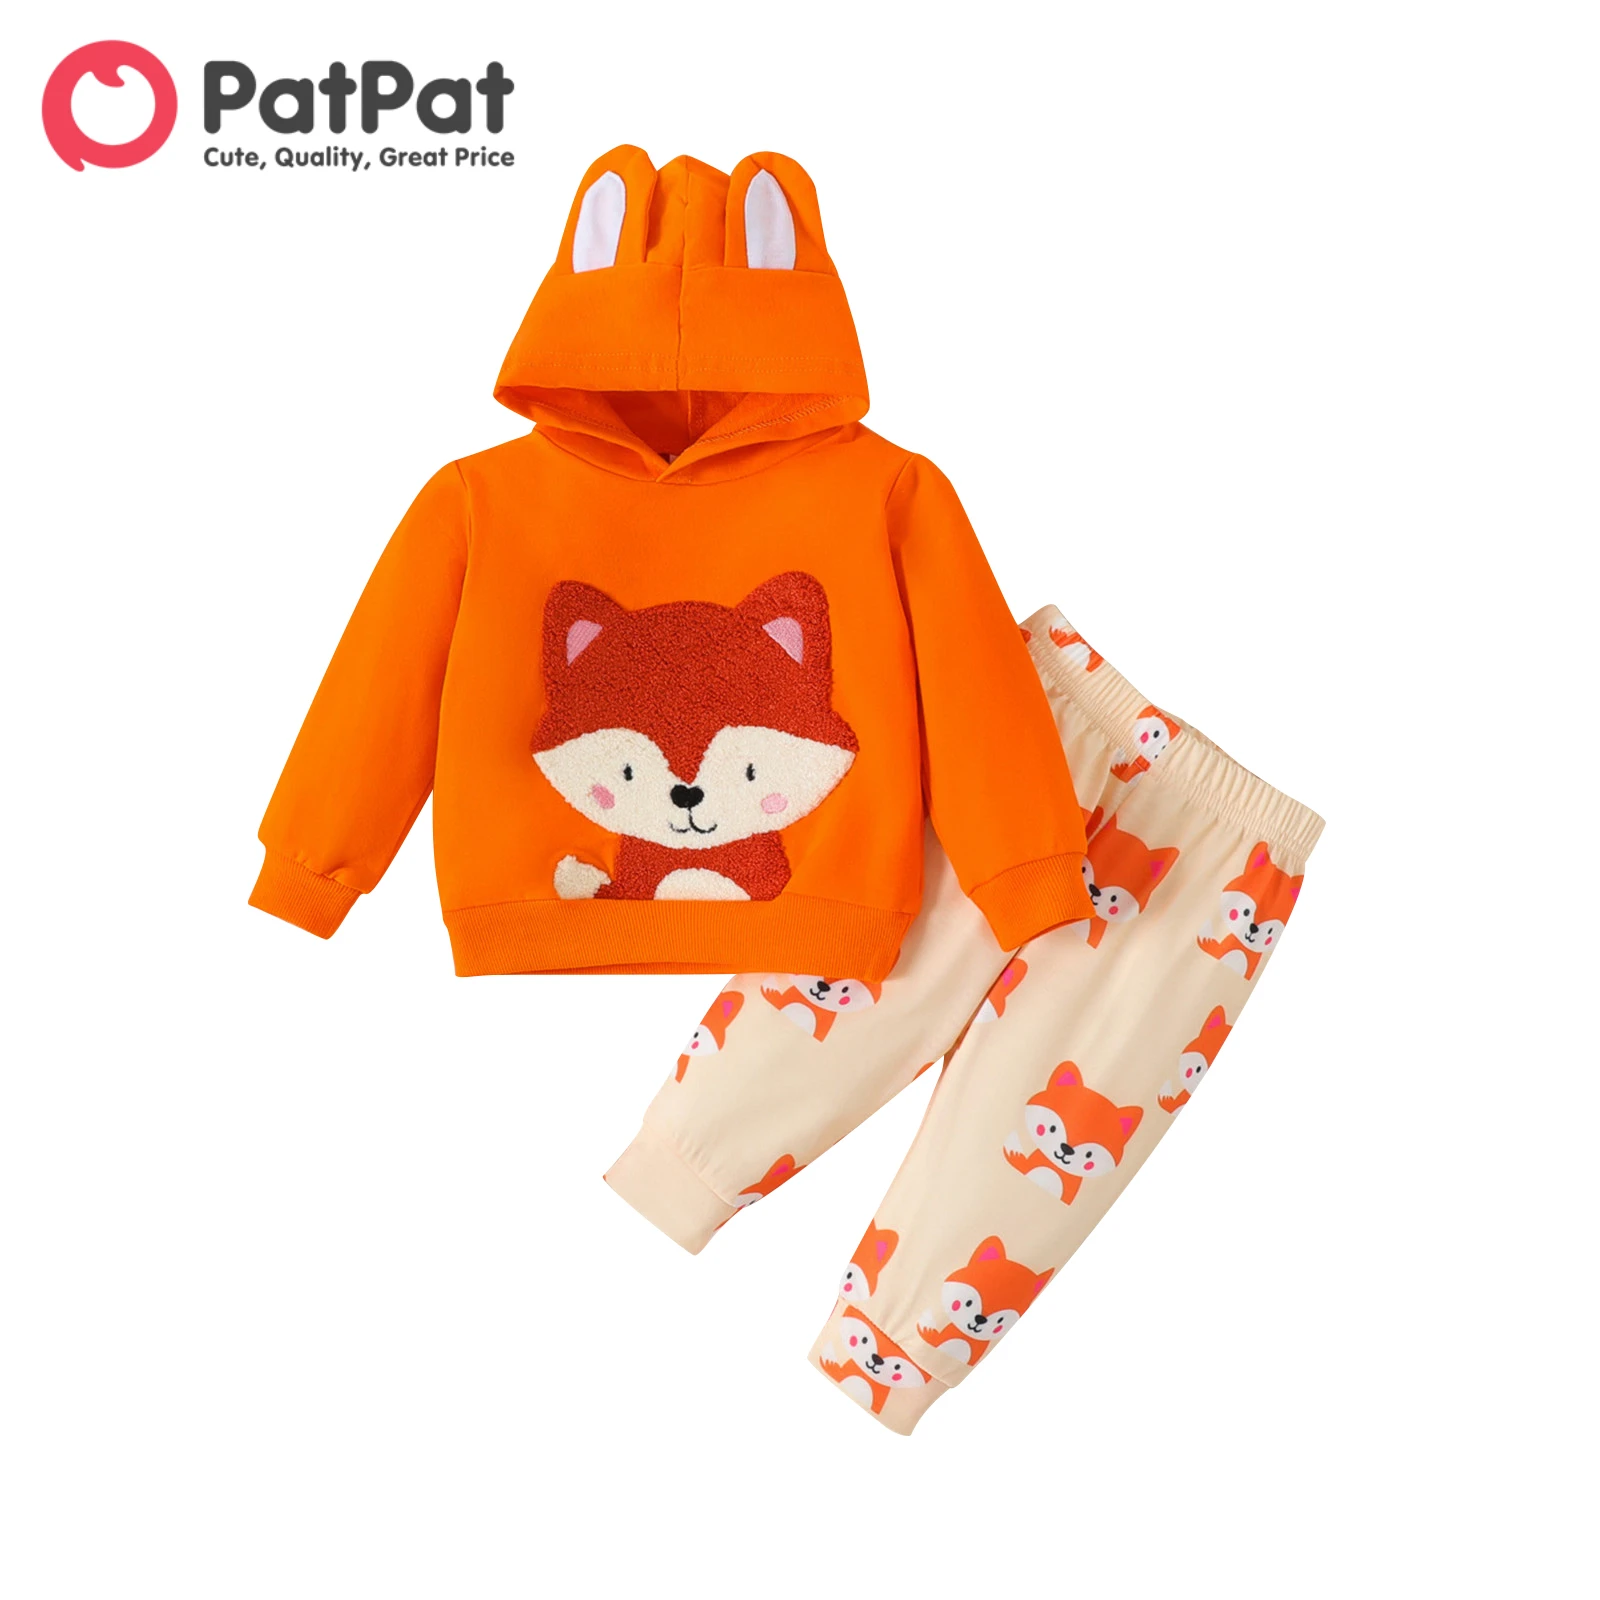 PatPat 100% Cotton Newborn Baby Girl Clothes Boy New Born Babies Items Costume Long-sleeve Fox Graphic Hoodie and Sweatpants Set